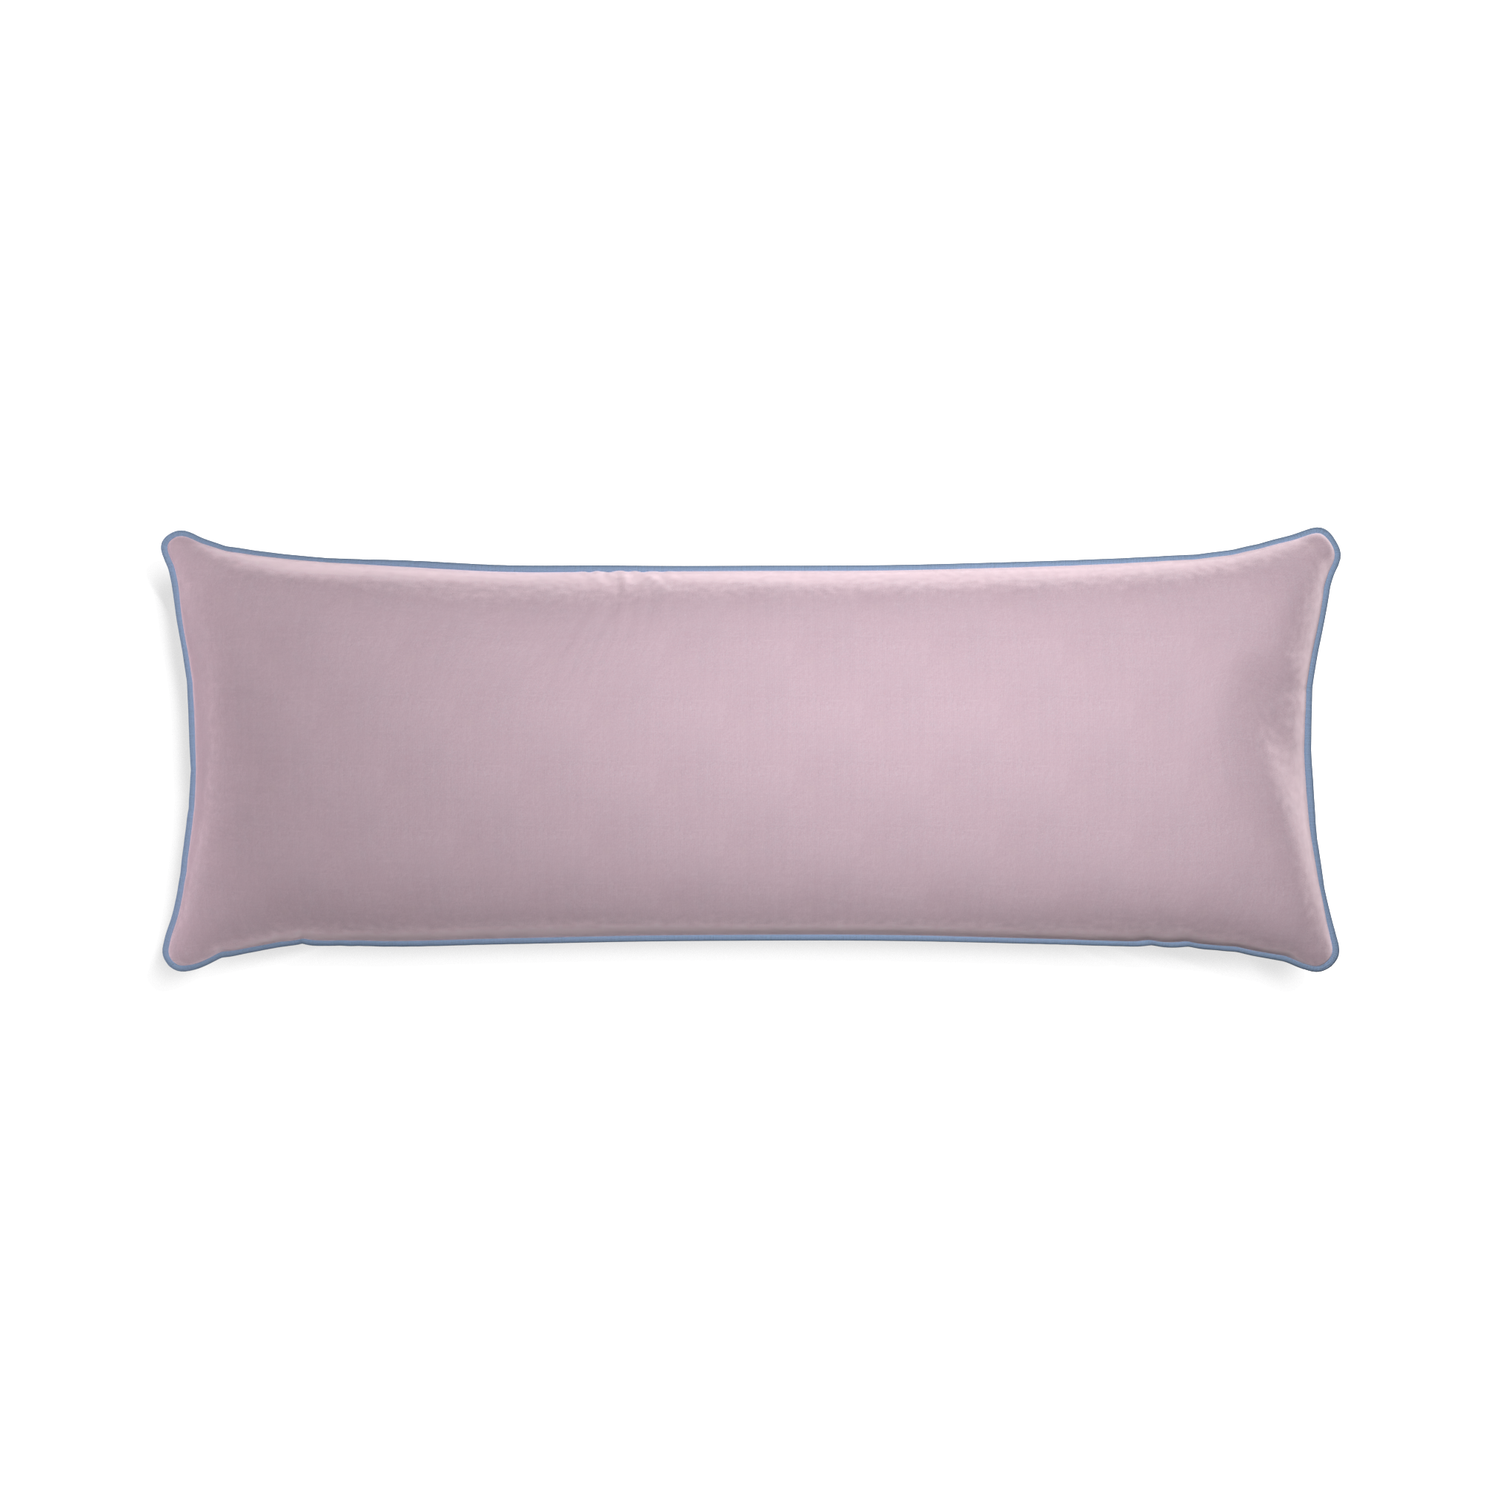 Xl-lumbar lilac velvet custom lilacpillow with sky piping on white background